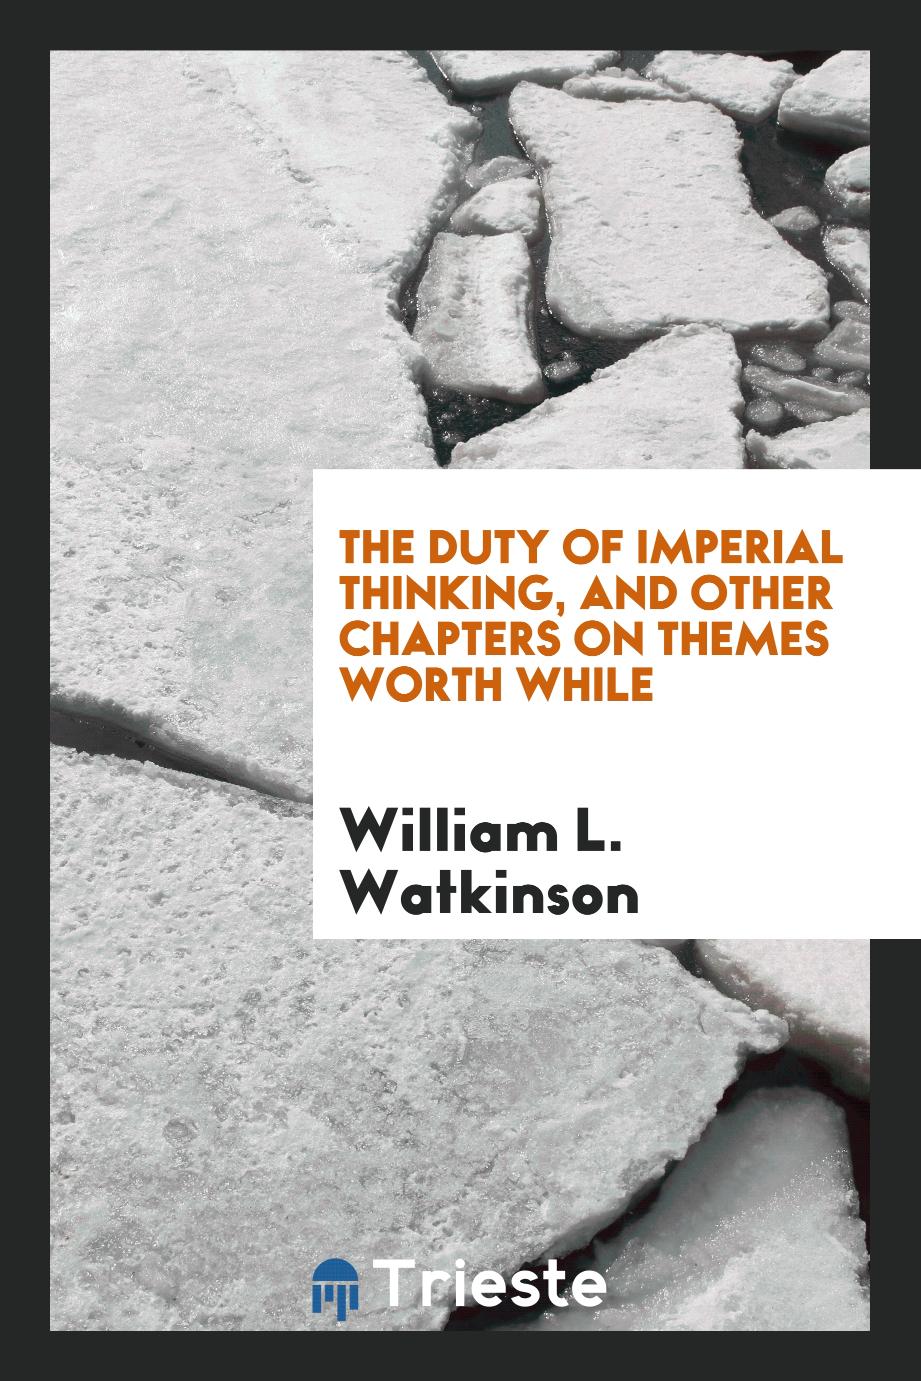 The duty of imperial thinking, and other chapters on themes worth while